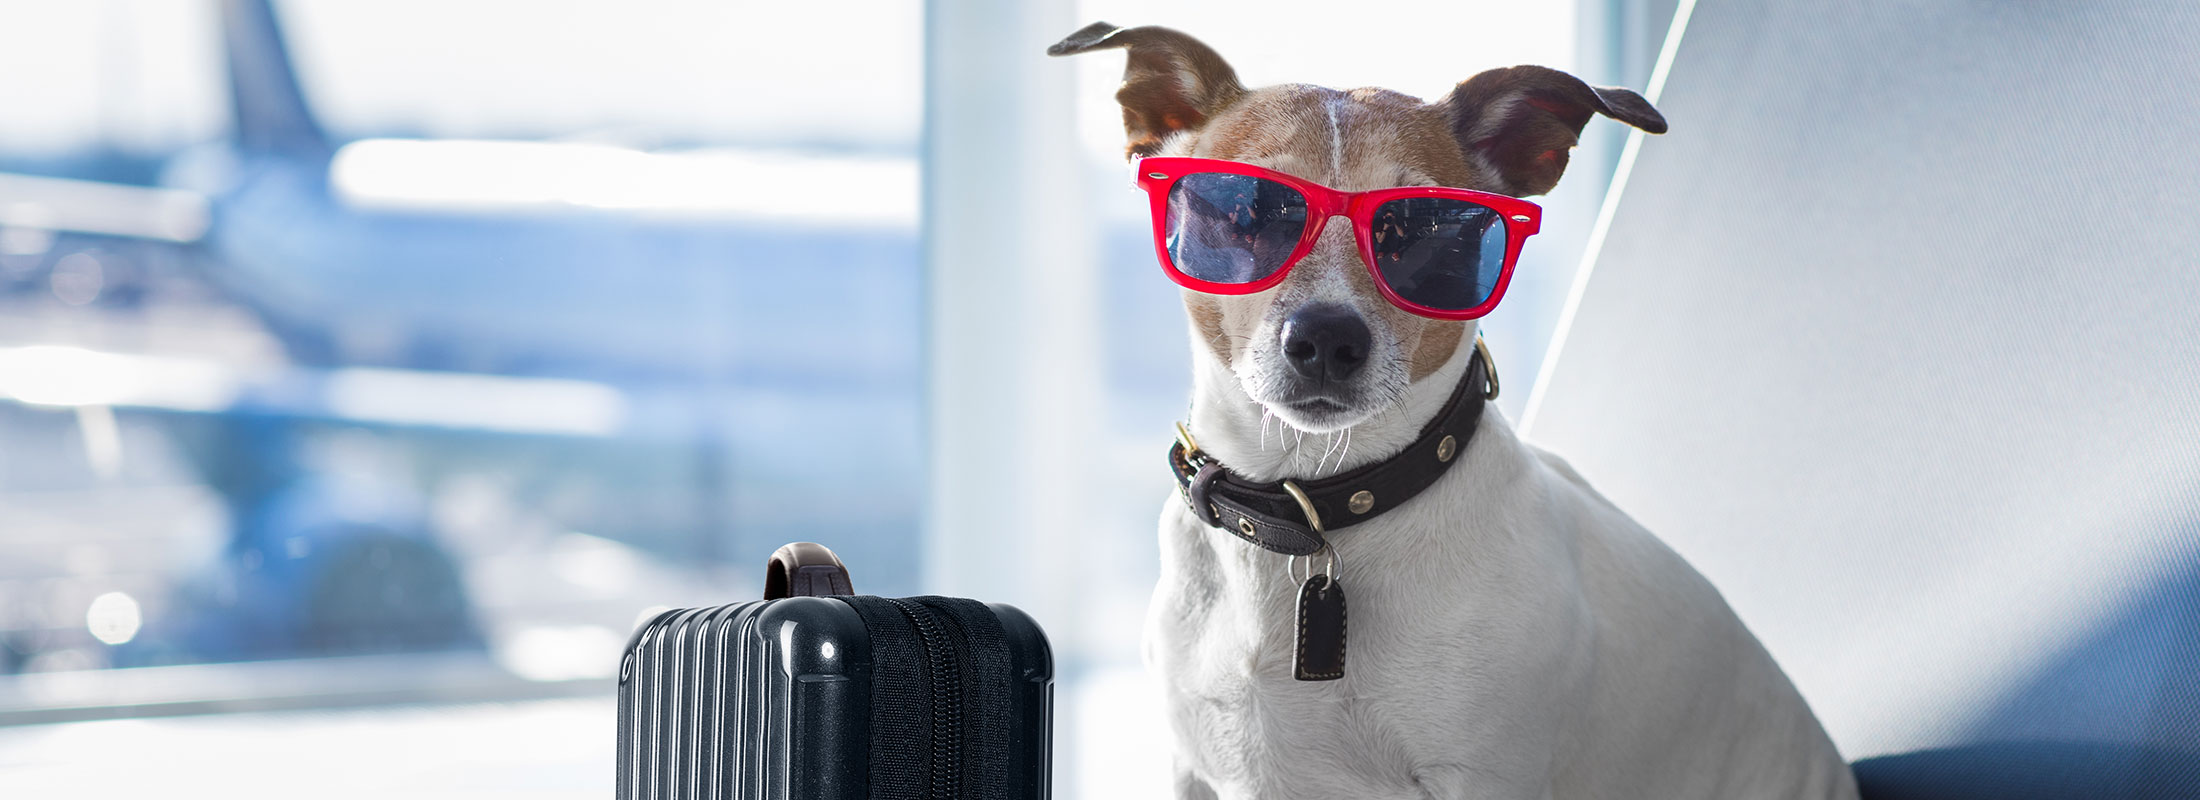 image of cute dogs at the airport